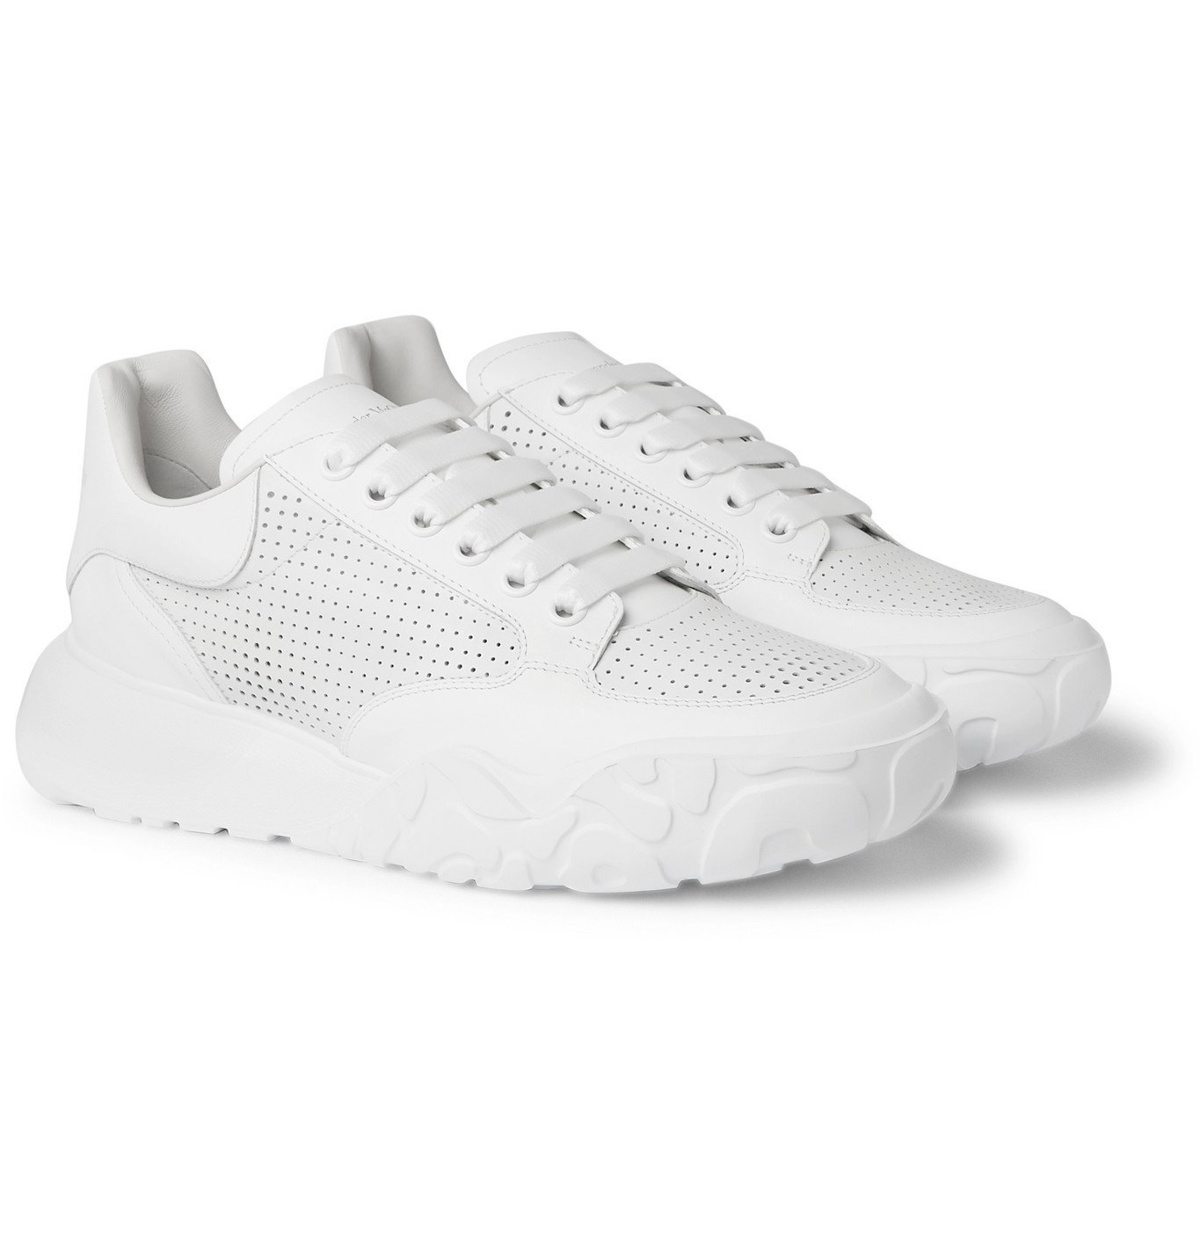 ALEXANDER MCQUEEN - Exaggerated-Sole Leather Sneakers - White Alexander ...